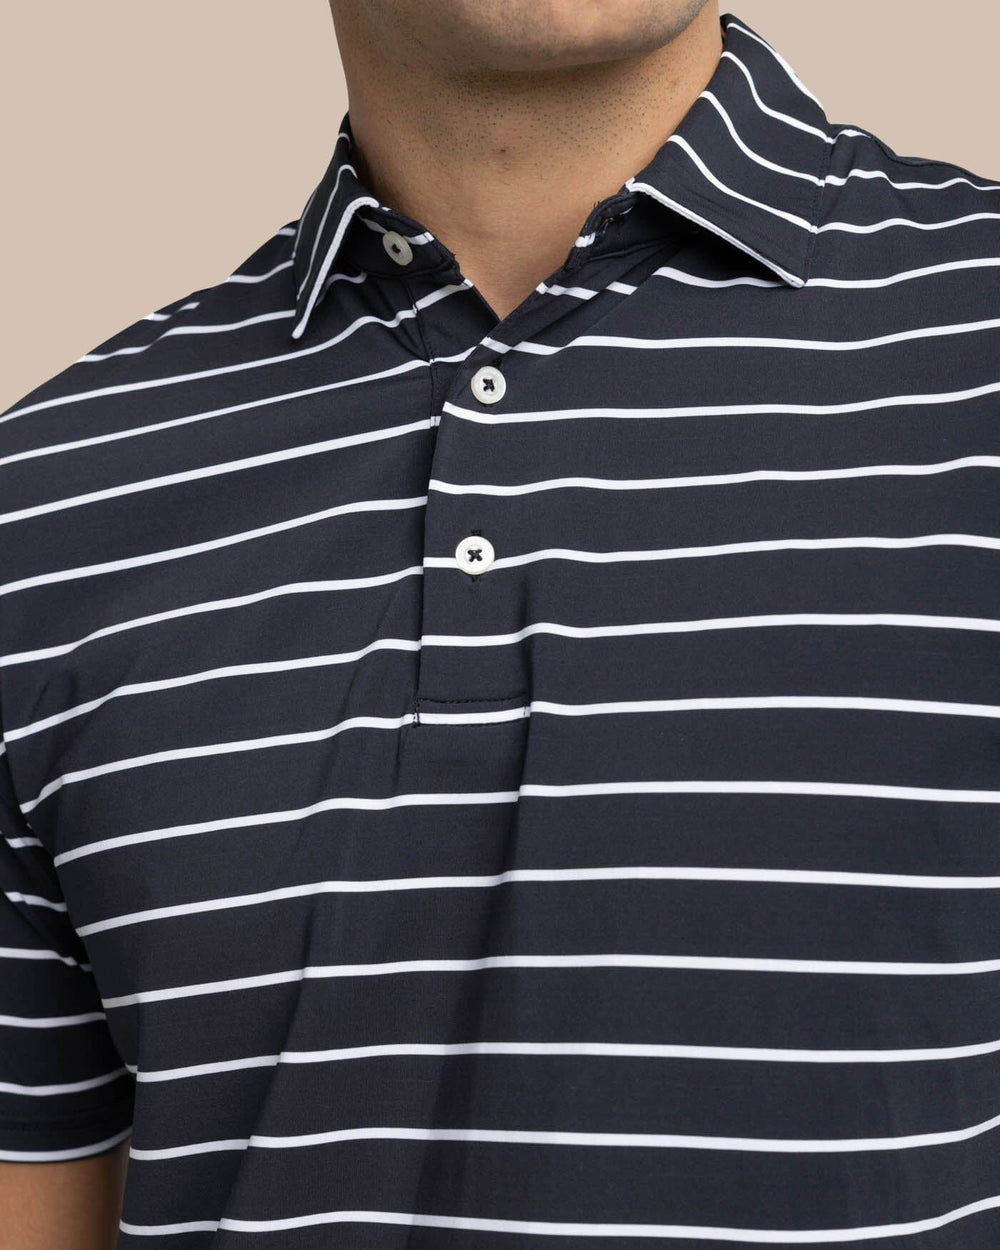 The detail view of the Southern Tide brrr-eeze Desmond Stripe Performance Polo by Southern Tide - Black